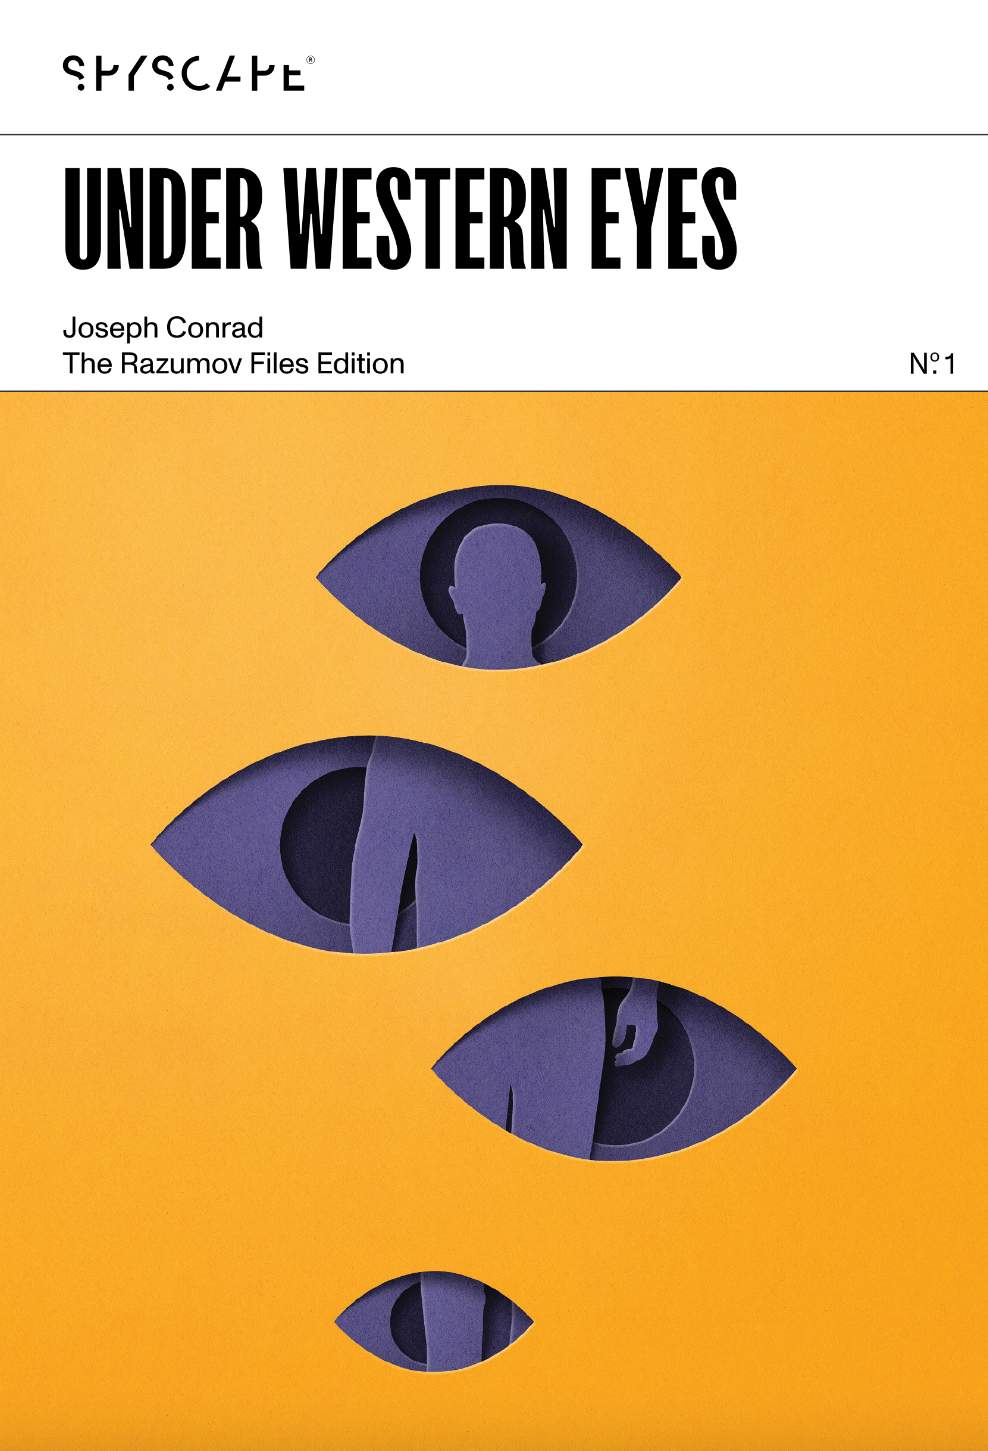 Under Western Eyes available at Amazon.com